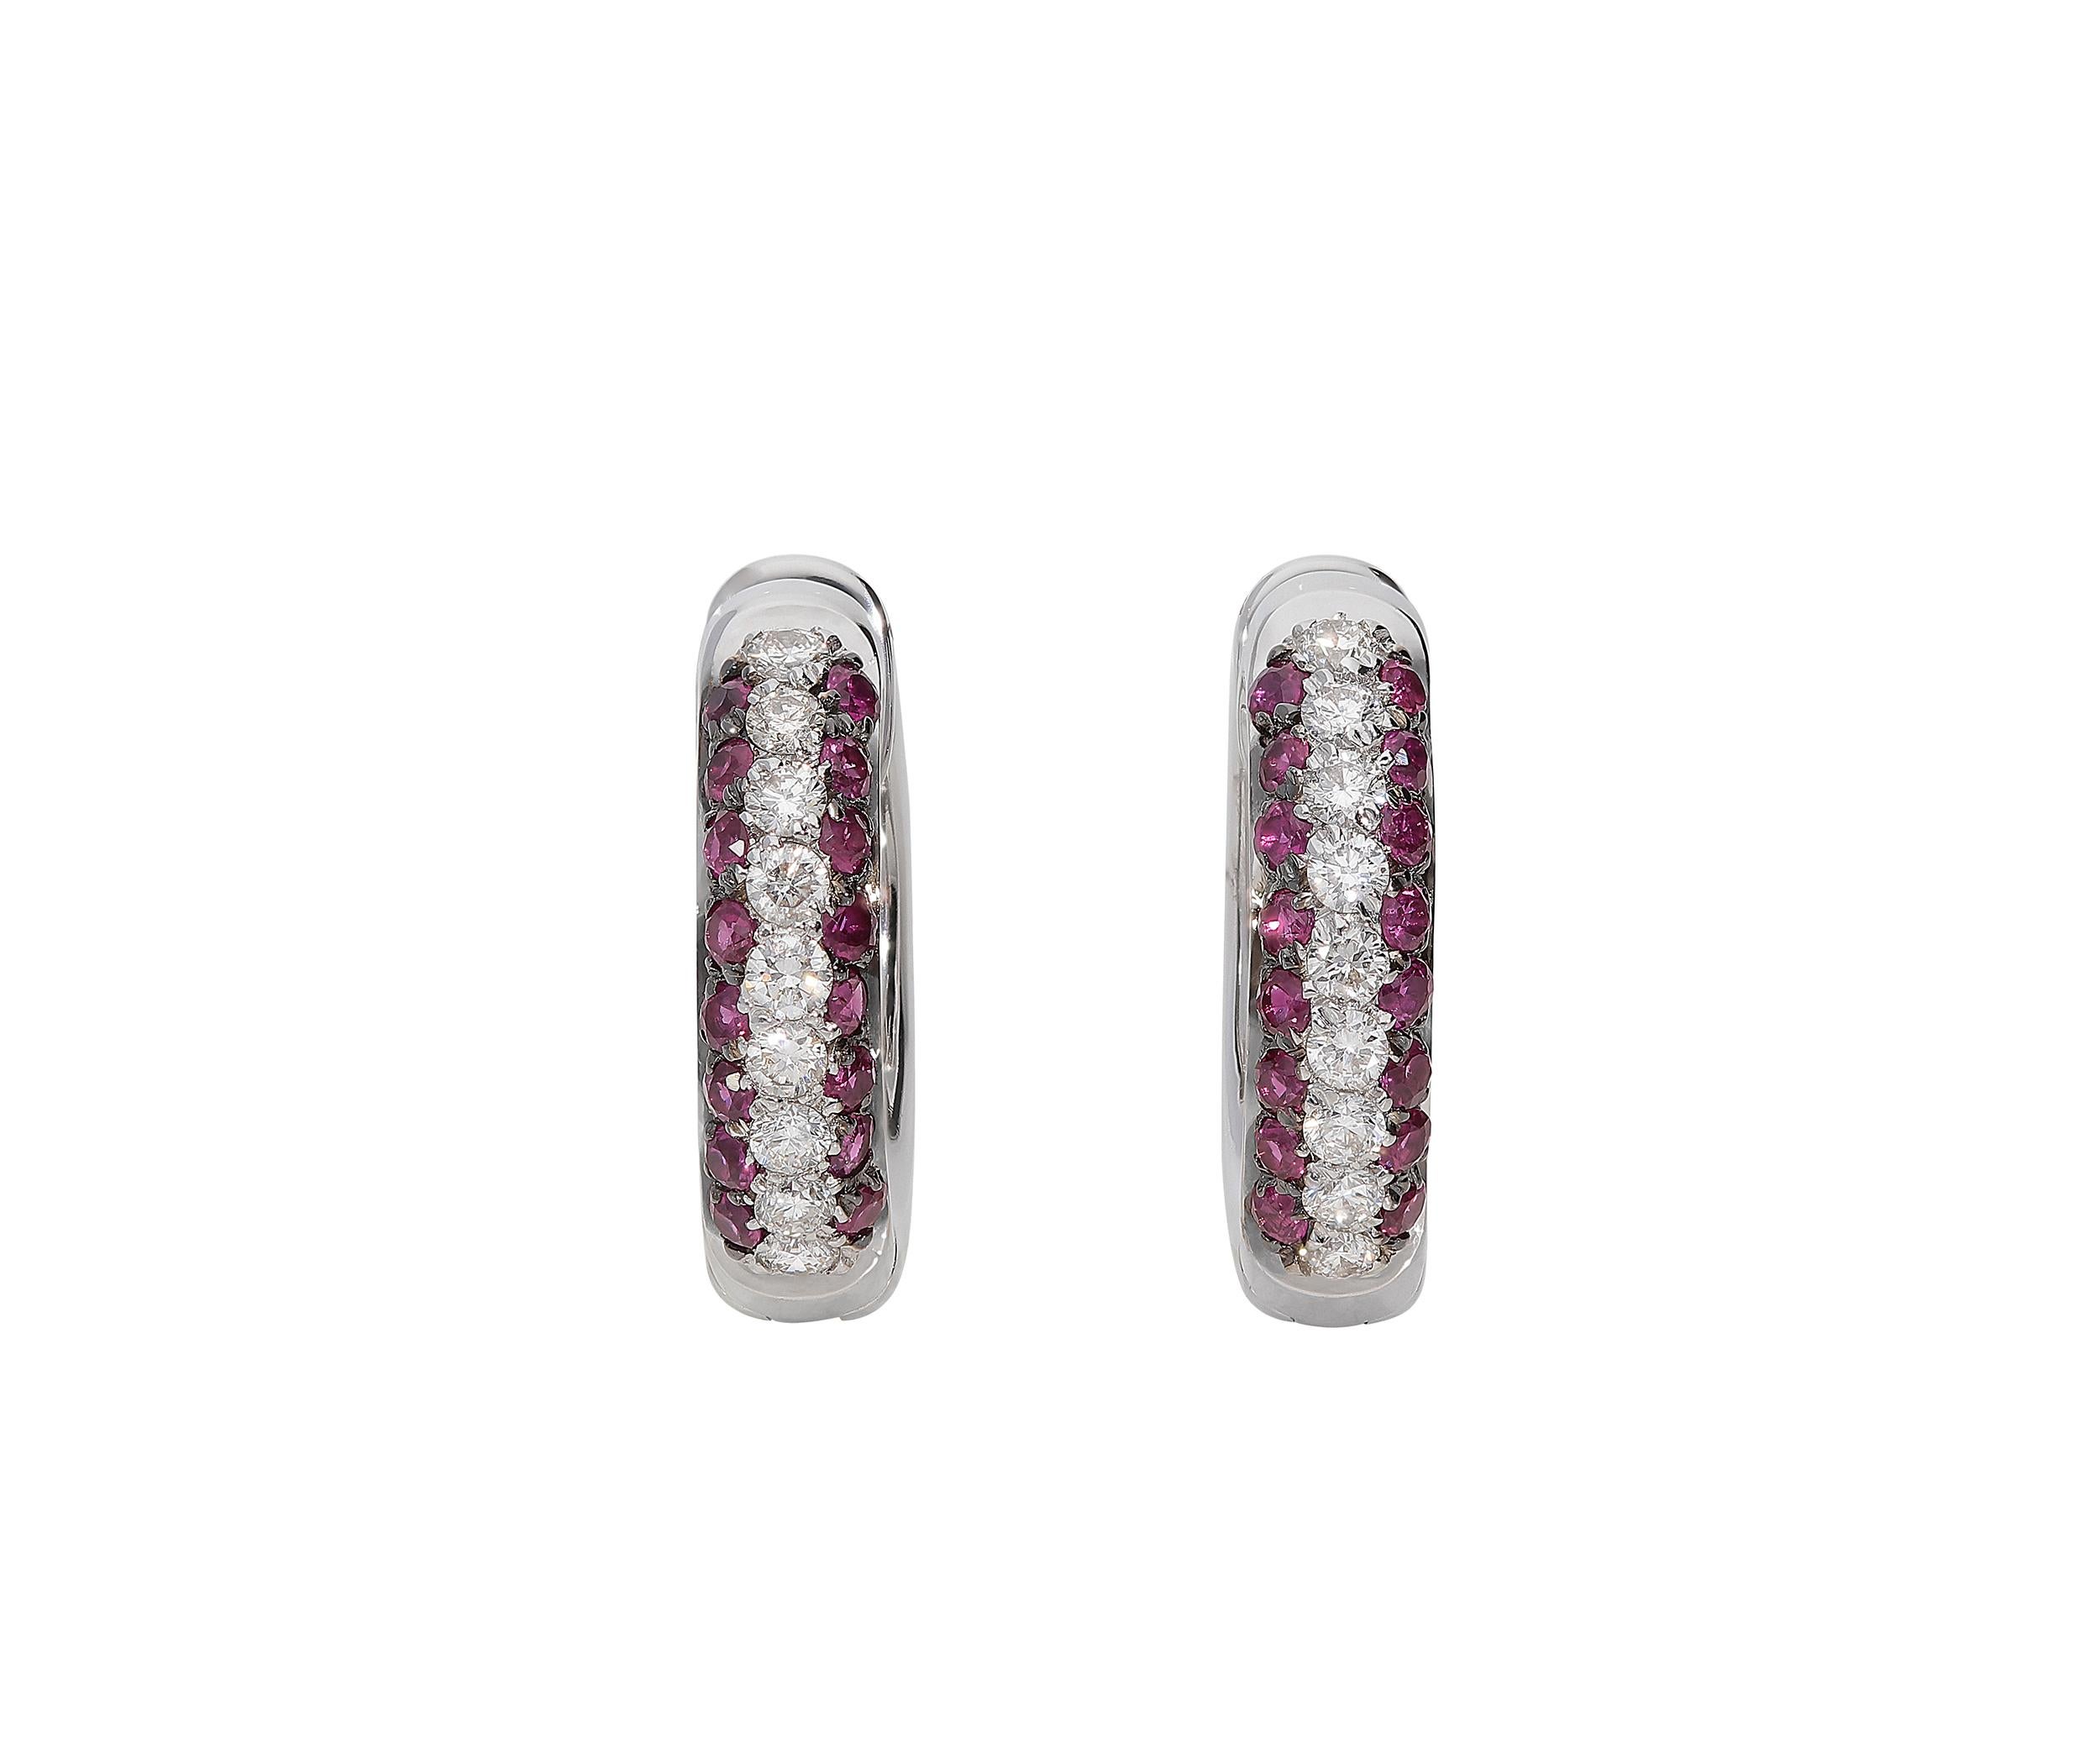 Small hoop earrings in 18kt white gold for 5,20 grams with 0,44 carats of rubies and 0,28 carats of white round brilliant diamonds color G clarity VS. 
The internal diameter of these earrings is 1,20 centimeters and the external one is 1,60